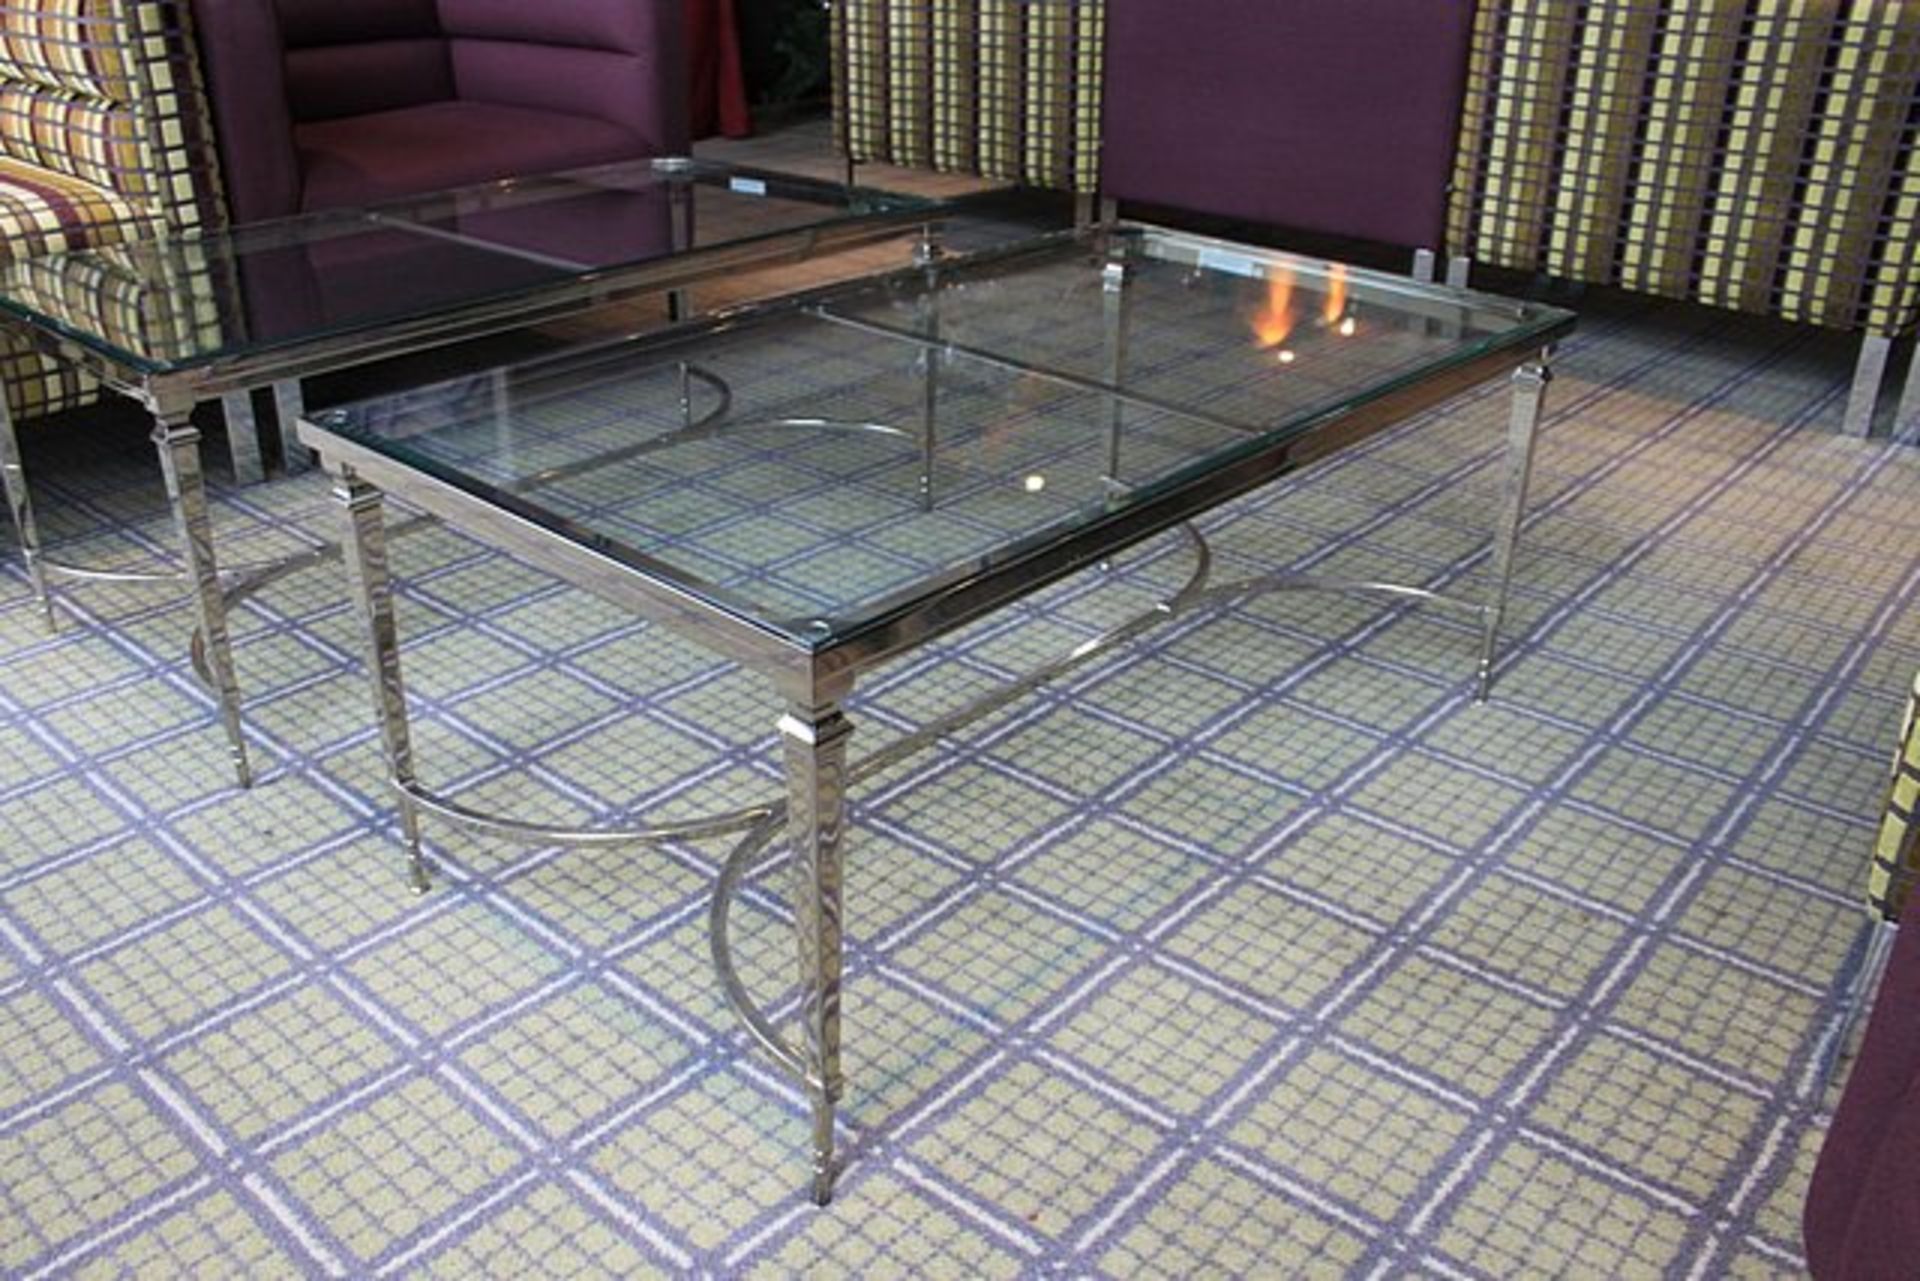 Chelsom Furniture Rectangular Tempered Glass Coffee Table Polished Steel Base FSW/F10133 1020 X - Image 4 of 4